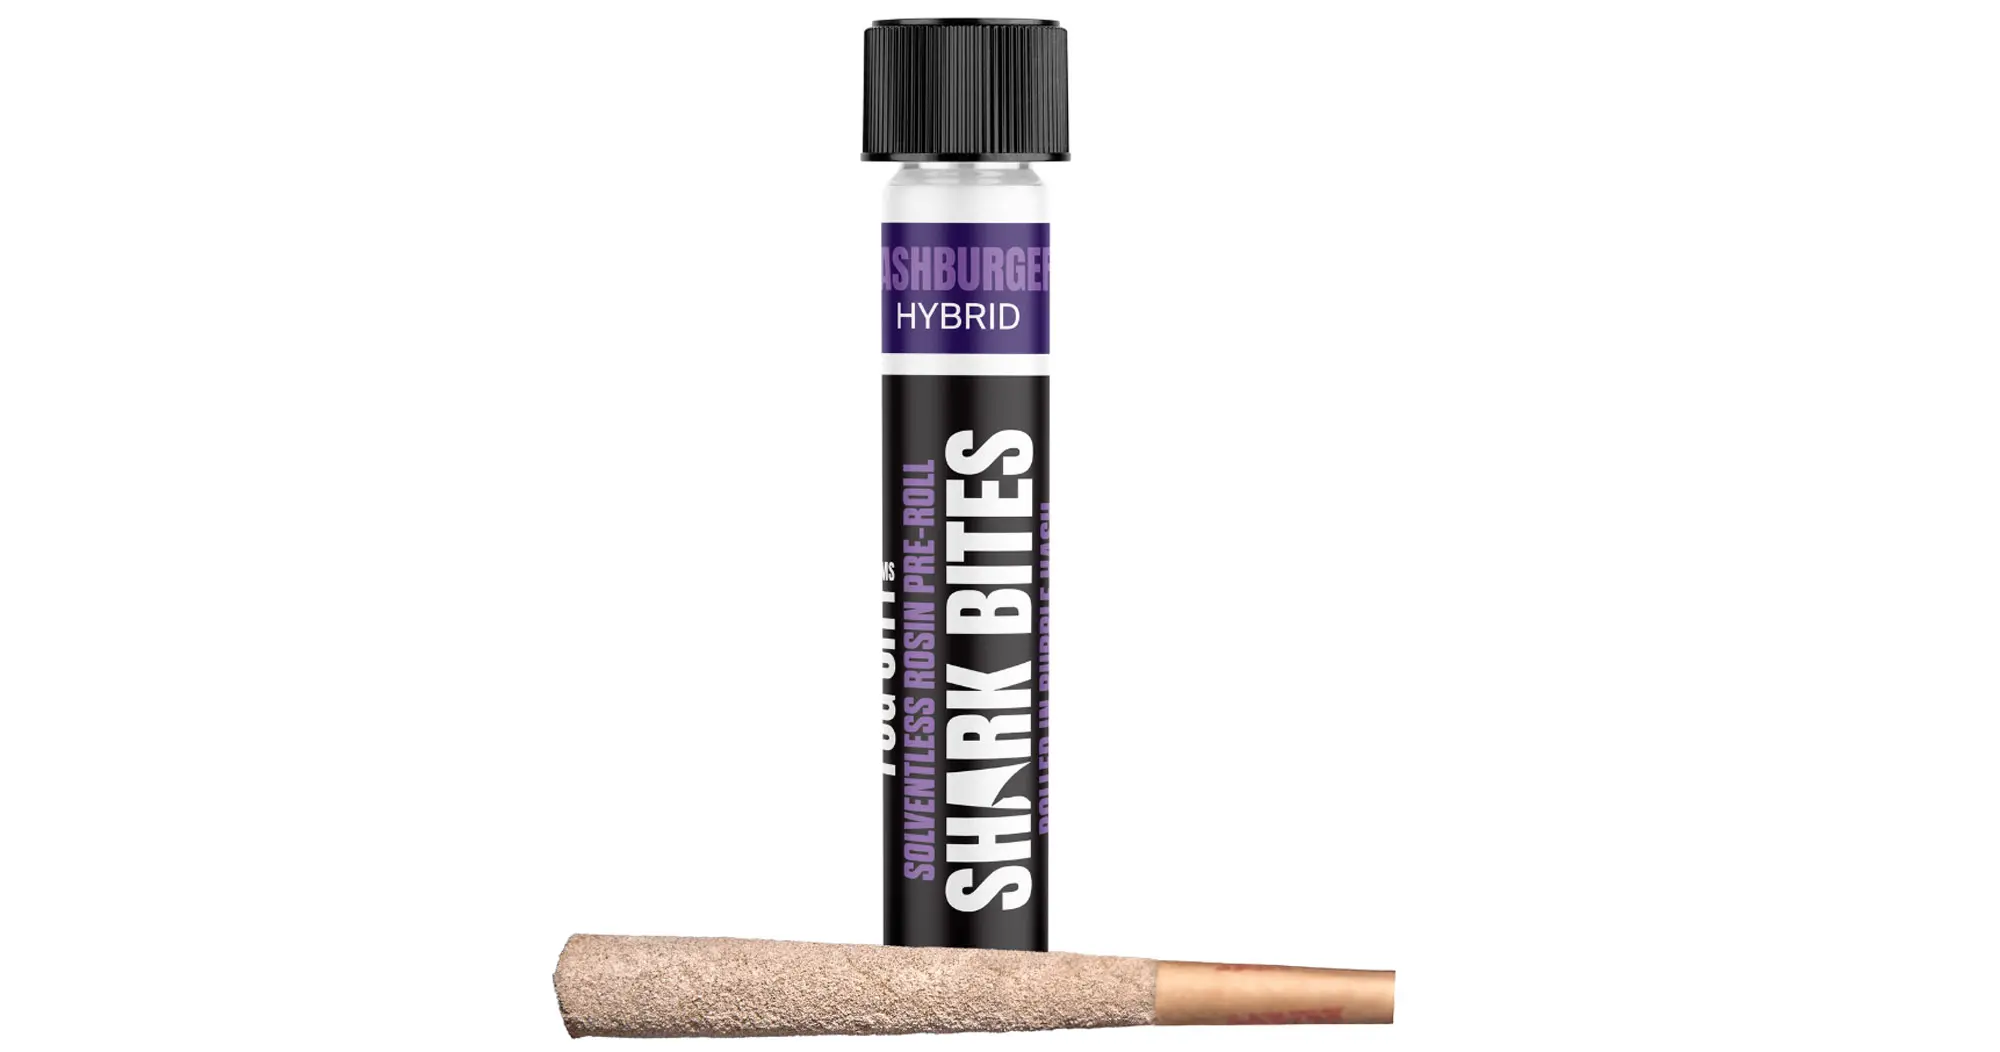 Hashburger Solventless Rosin Infused Pre-Roll